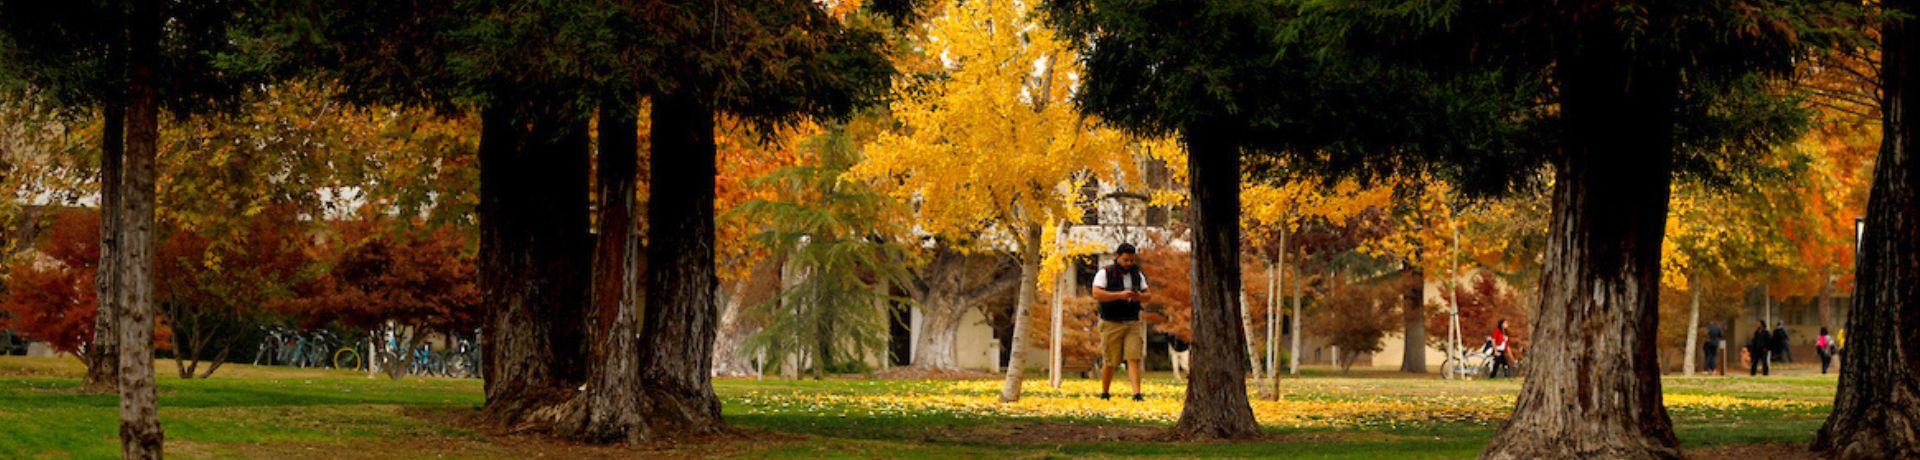 student walking through campus in the fall